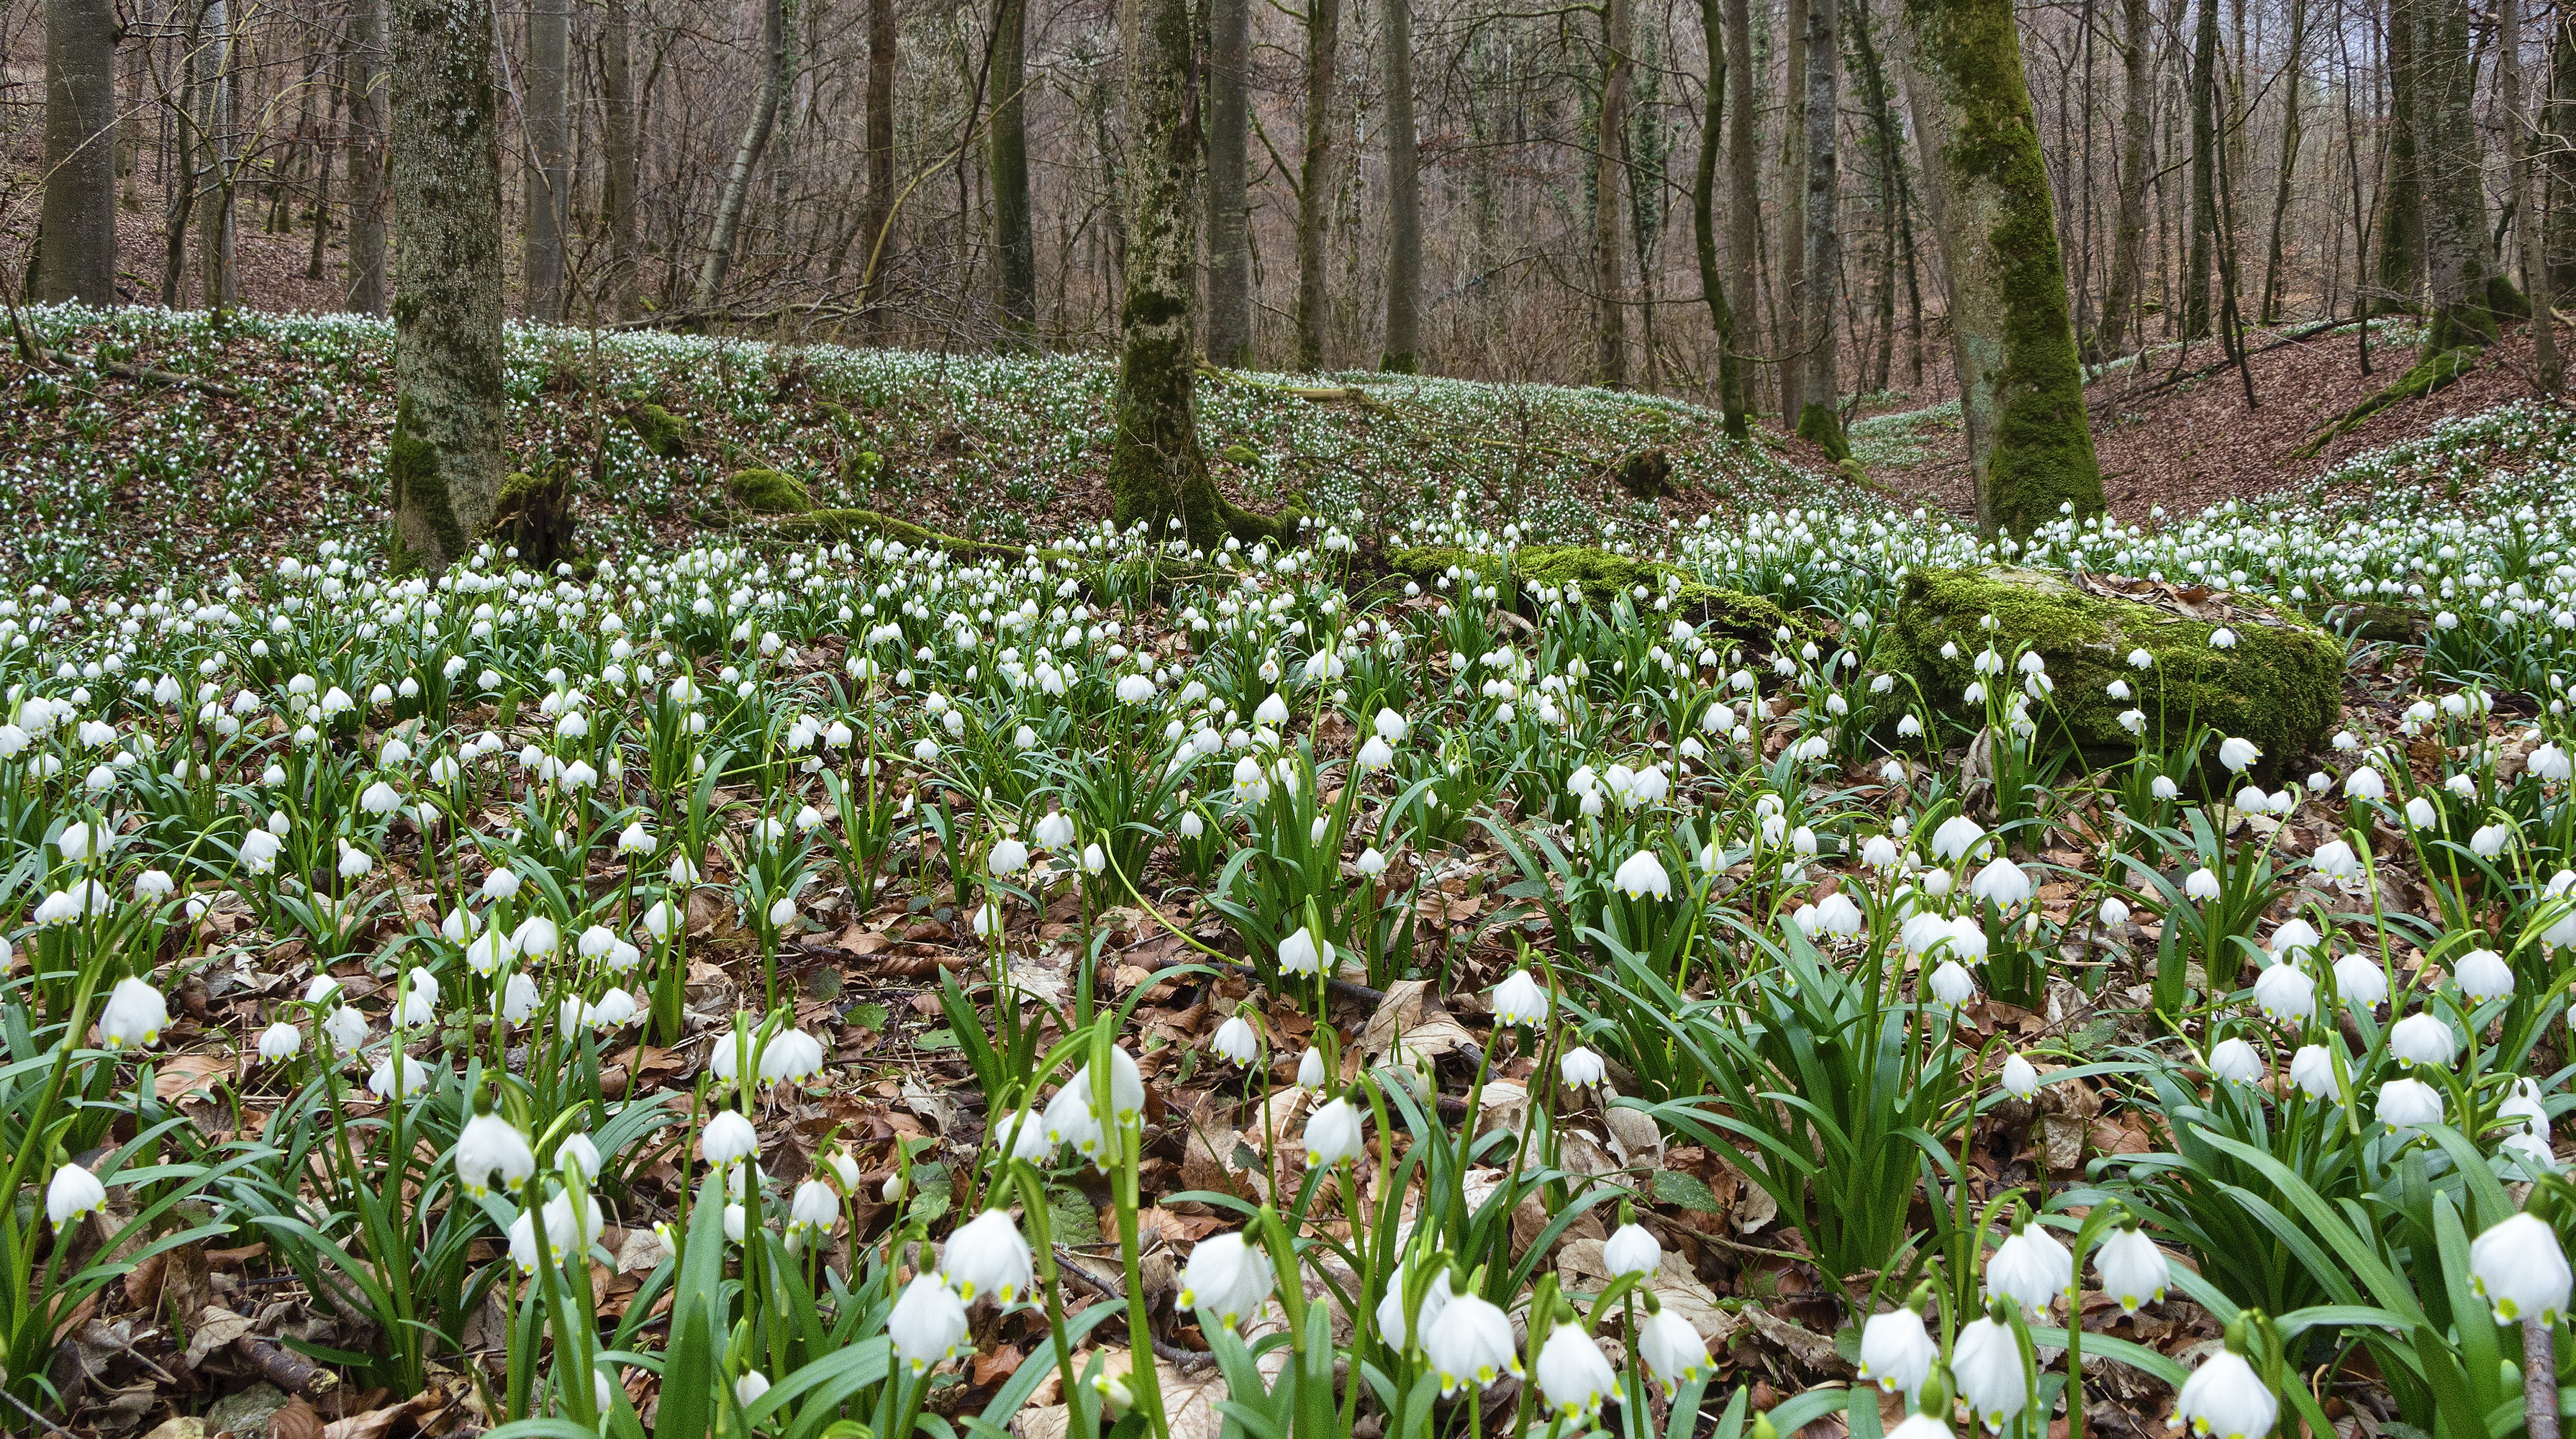 Spring_Forests_Snowdrops_Many_Moss_520862_3580x2000.jpg